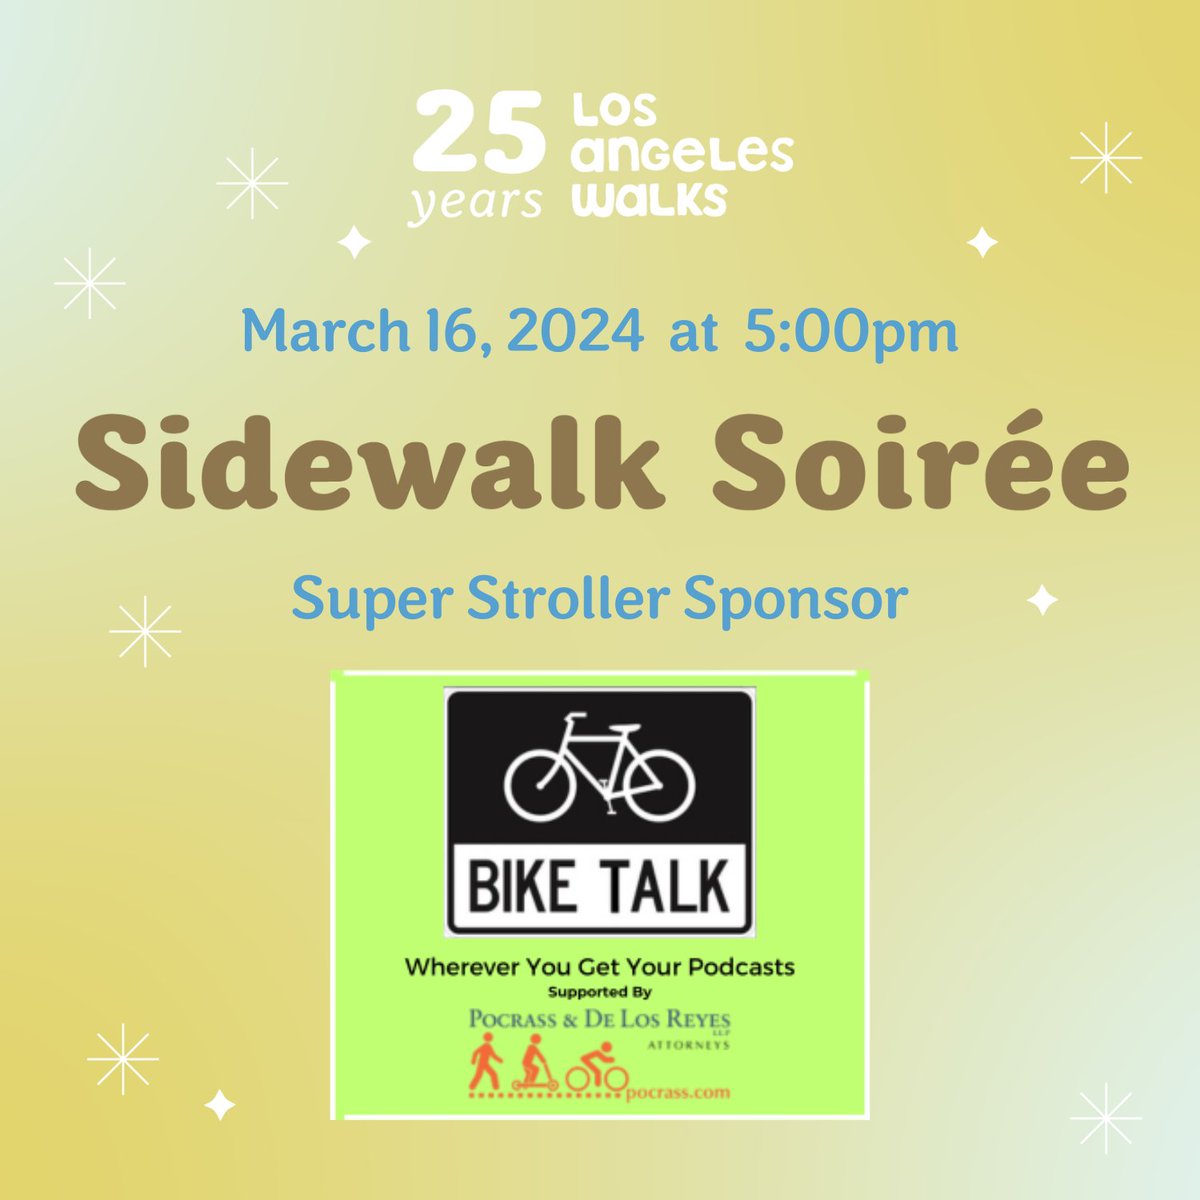 Thank you to our Super Stroller Sponsor @biketalkpfk — your support makes our work possible. There’s still time to get tickets or sponsor our Sidewalk Soirée on Saturday, March 16! losangeleswalks.org/2024_sidewalk_…